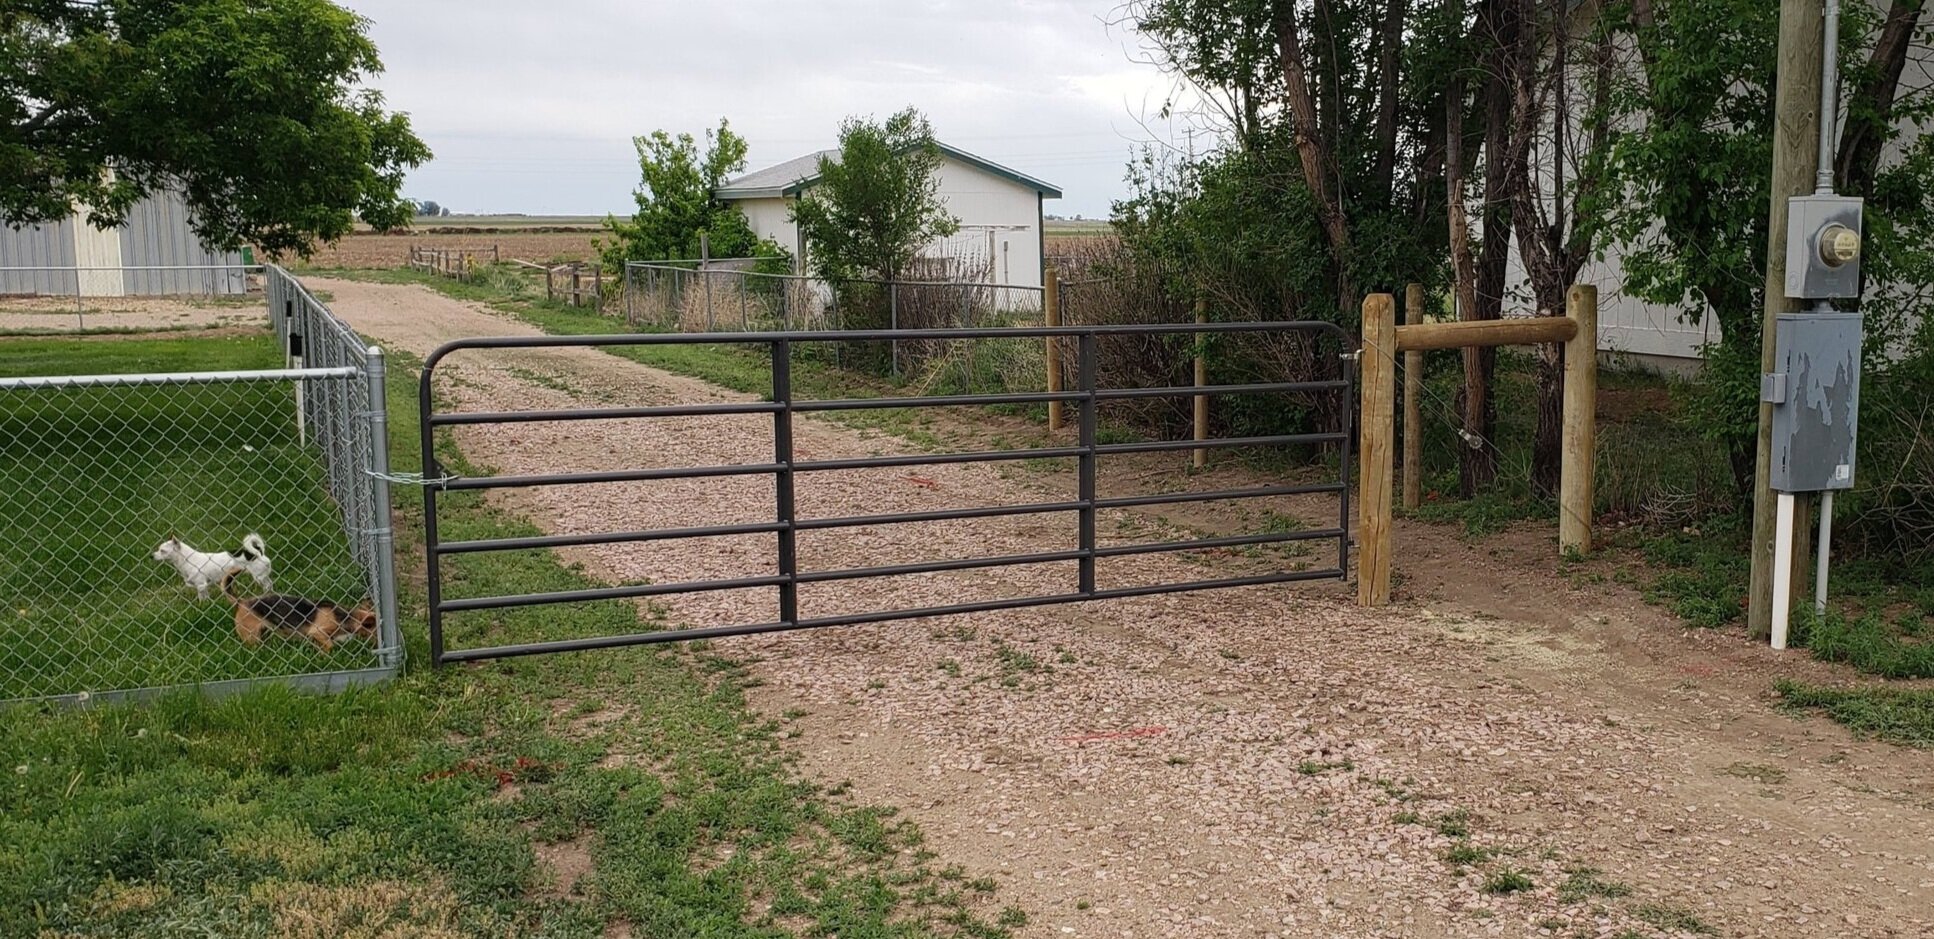 Added Gate at a New Driveway